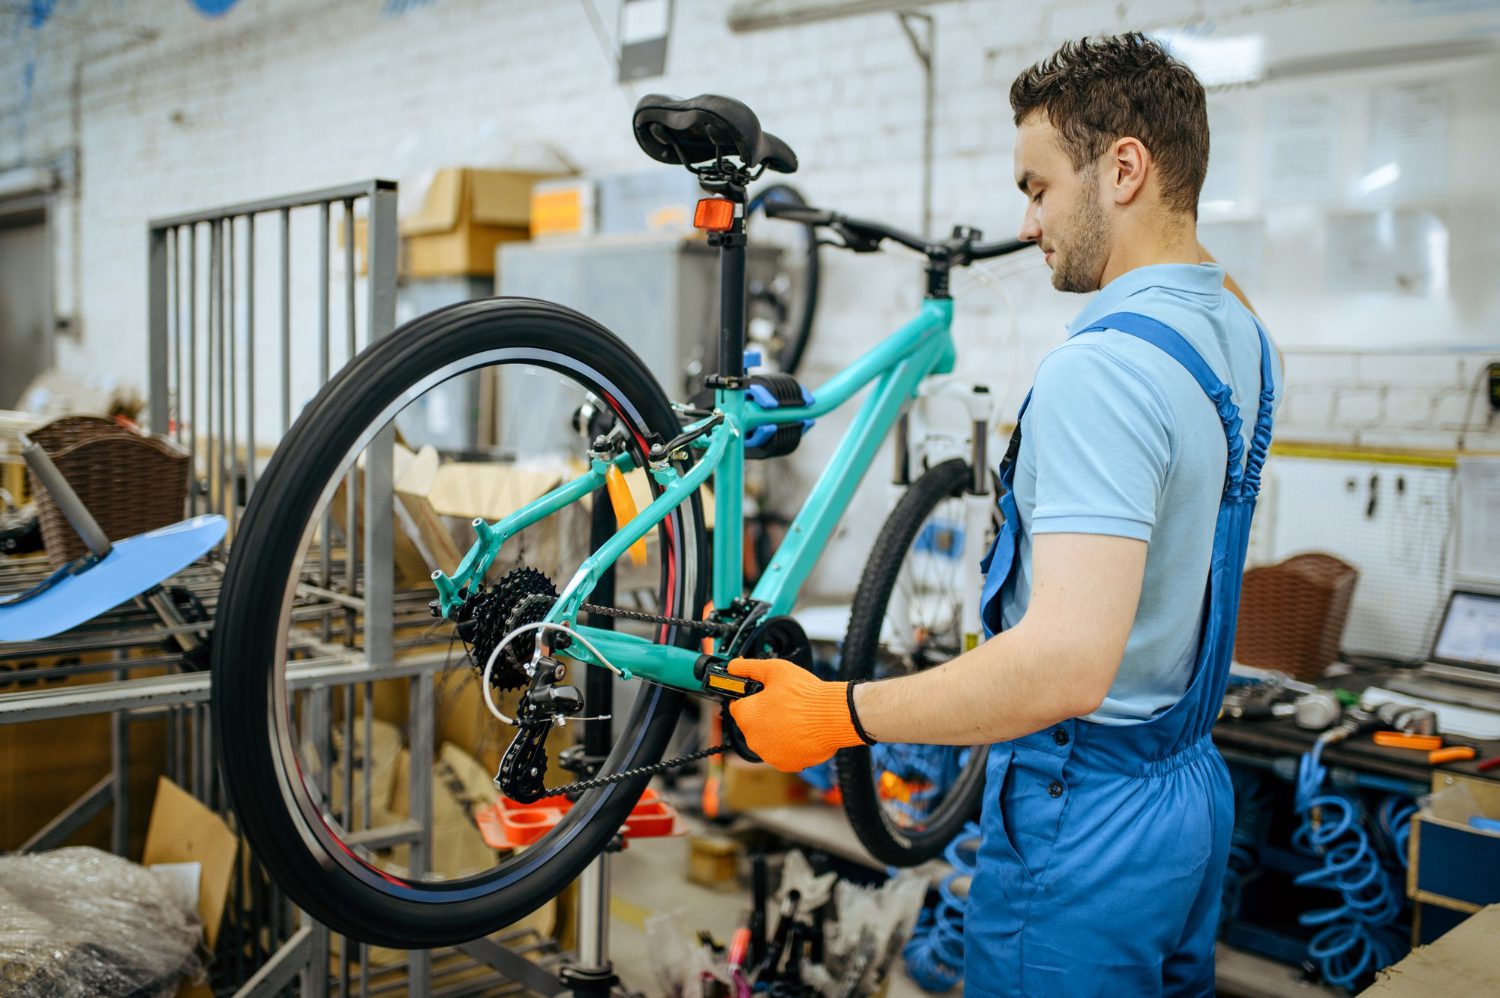 Bicycle factory, worker holds mountain bike. male mechanic in uniform installs cycle parts, assembly line in workshop